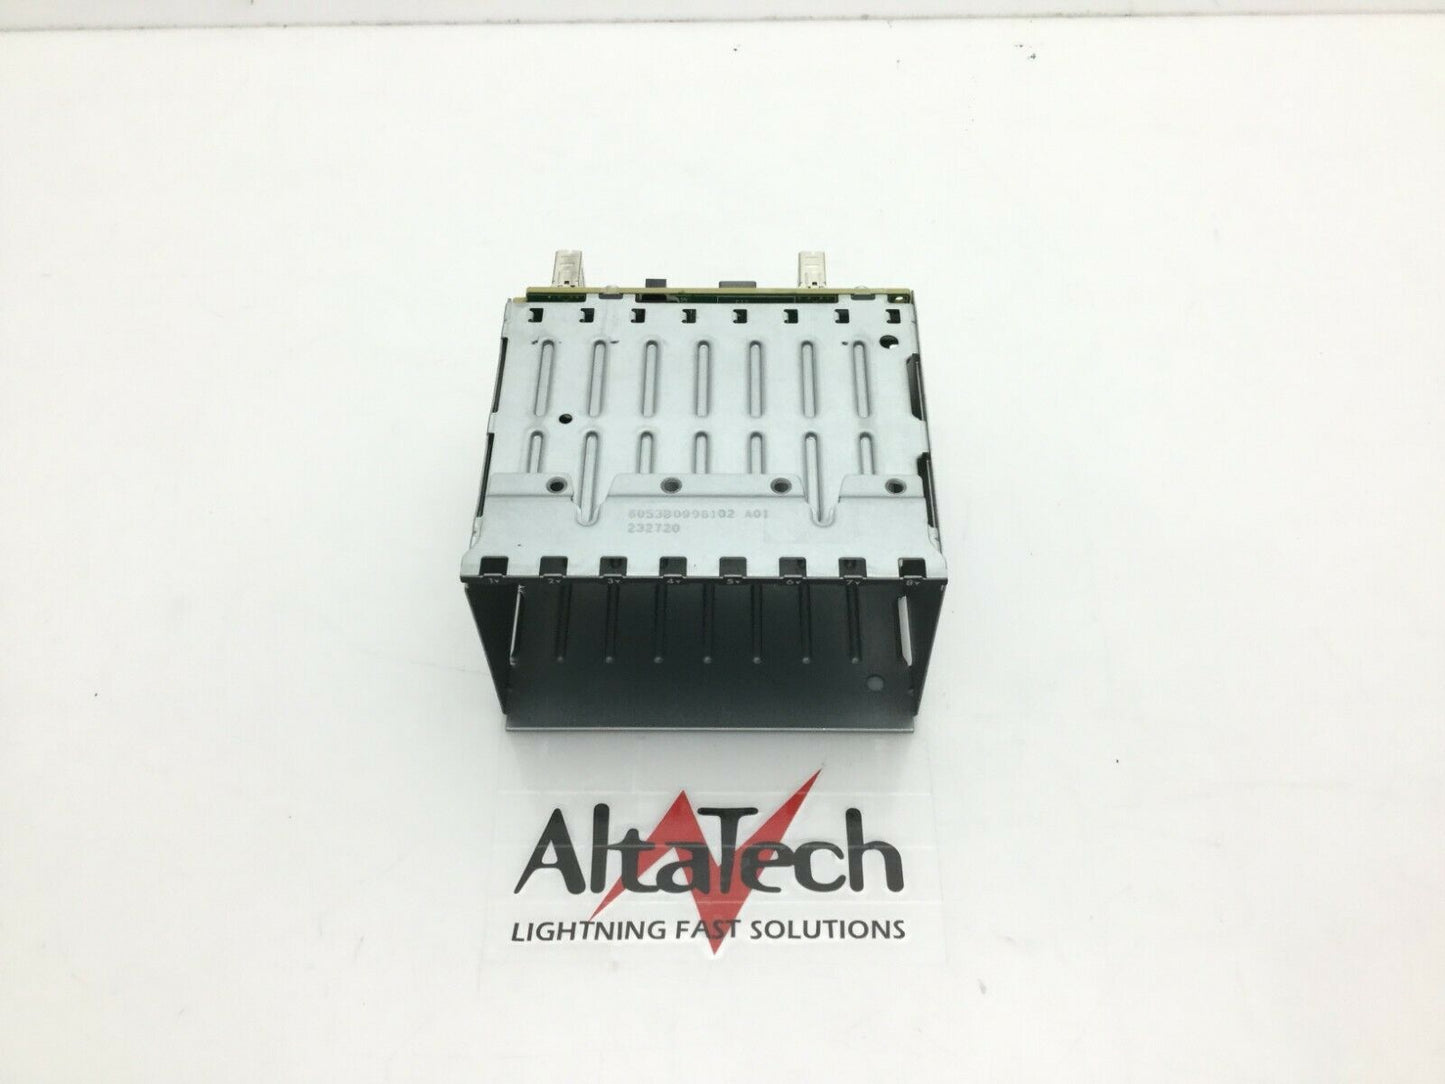 HP 768857-B21 8SFF Bay2 Cage / Backplane Kit, Used